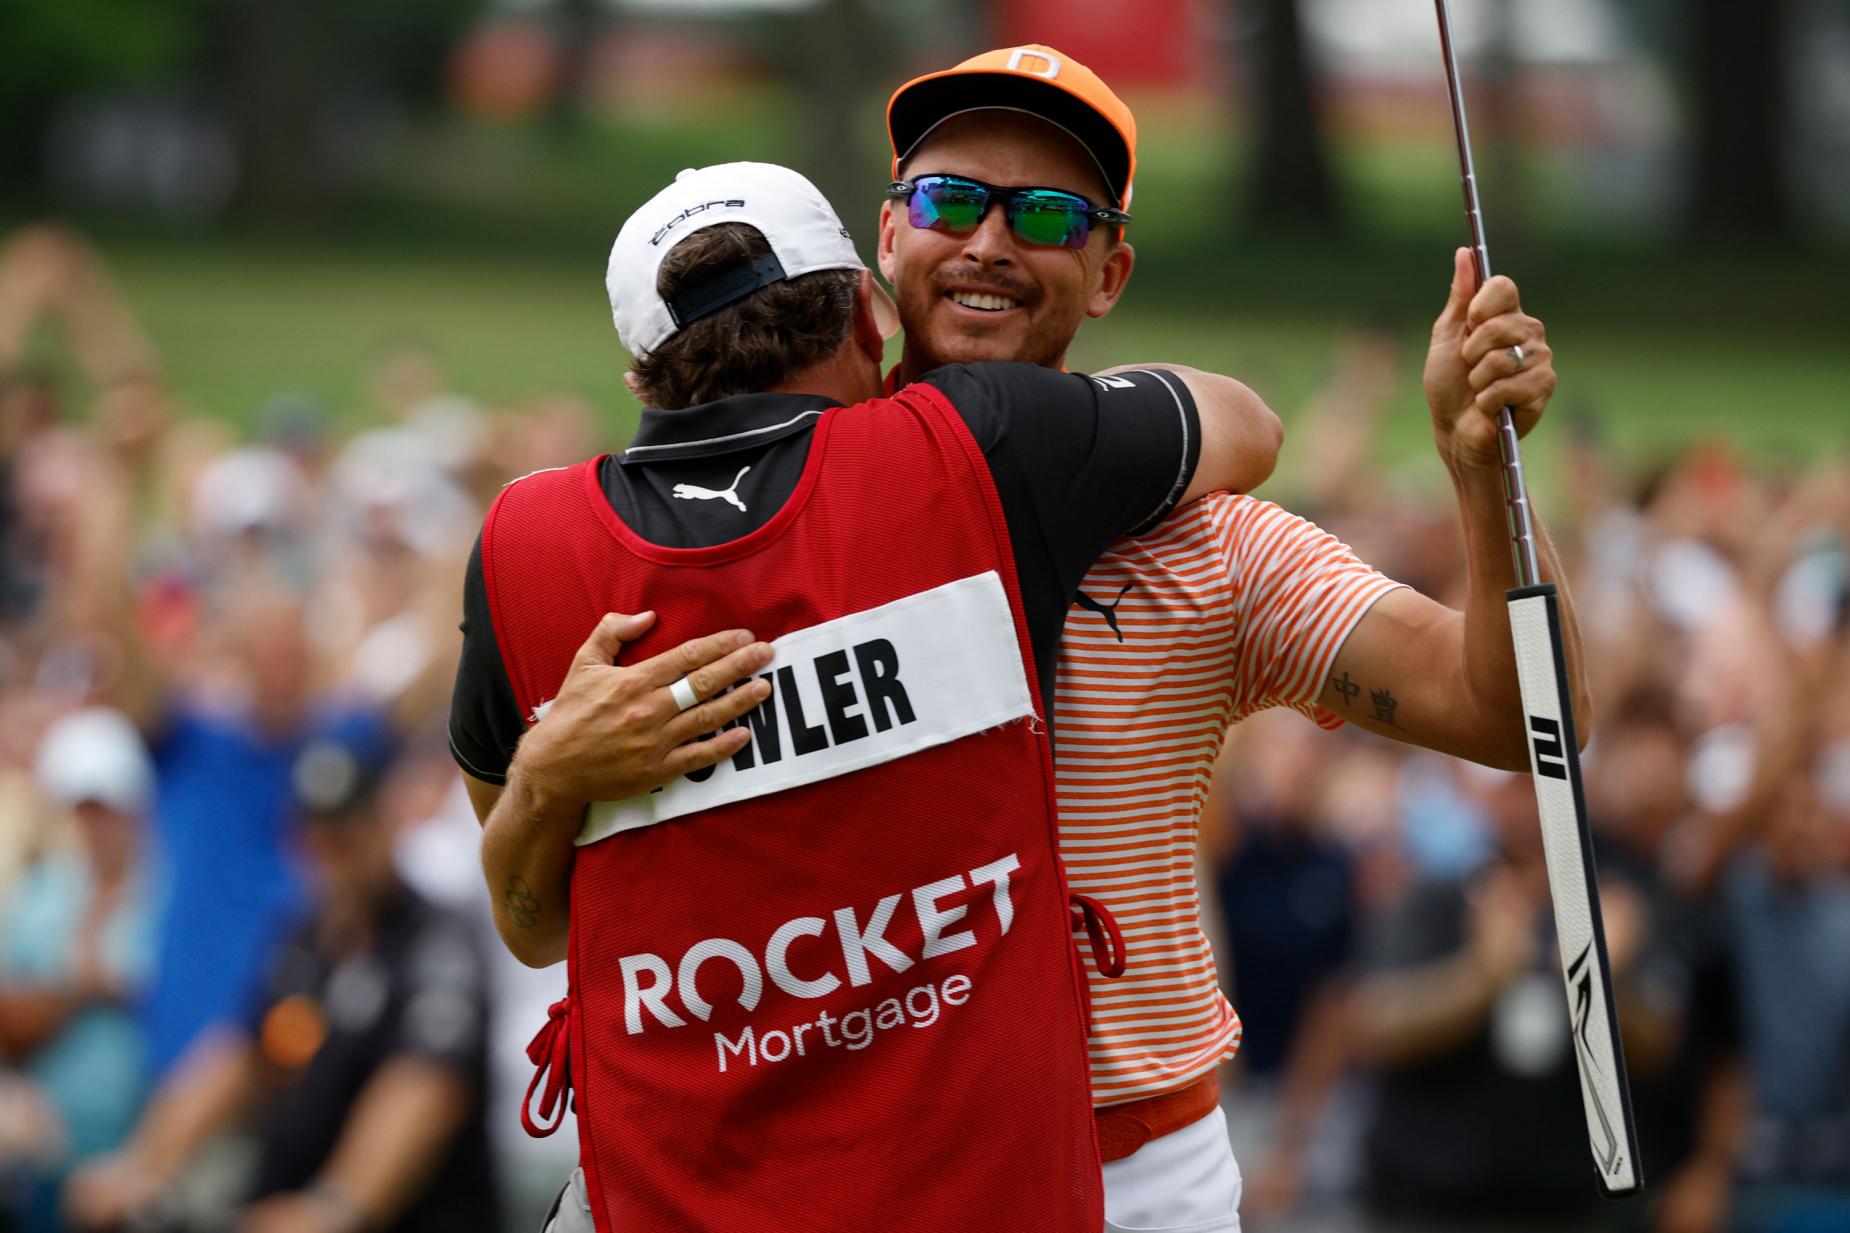 ‘It’s been a long road’ Rickie Fowler’s comeback win is special for